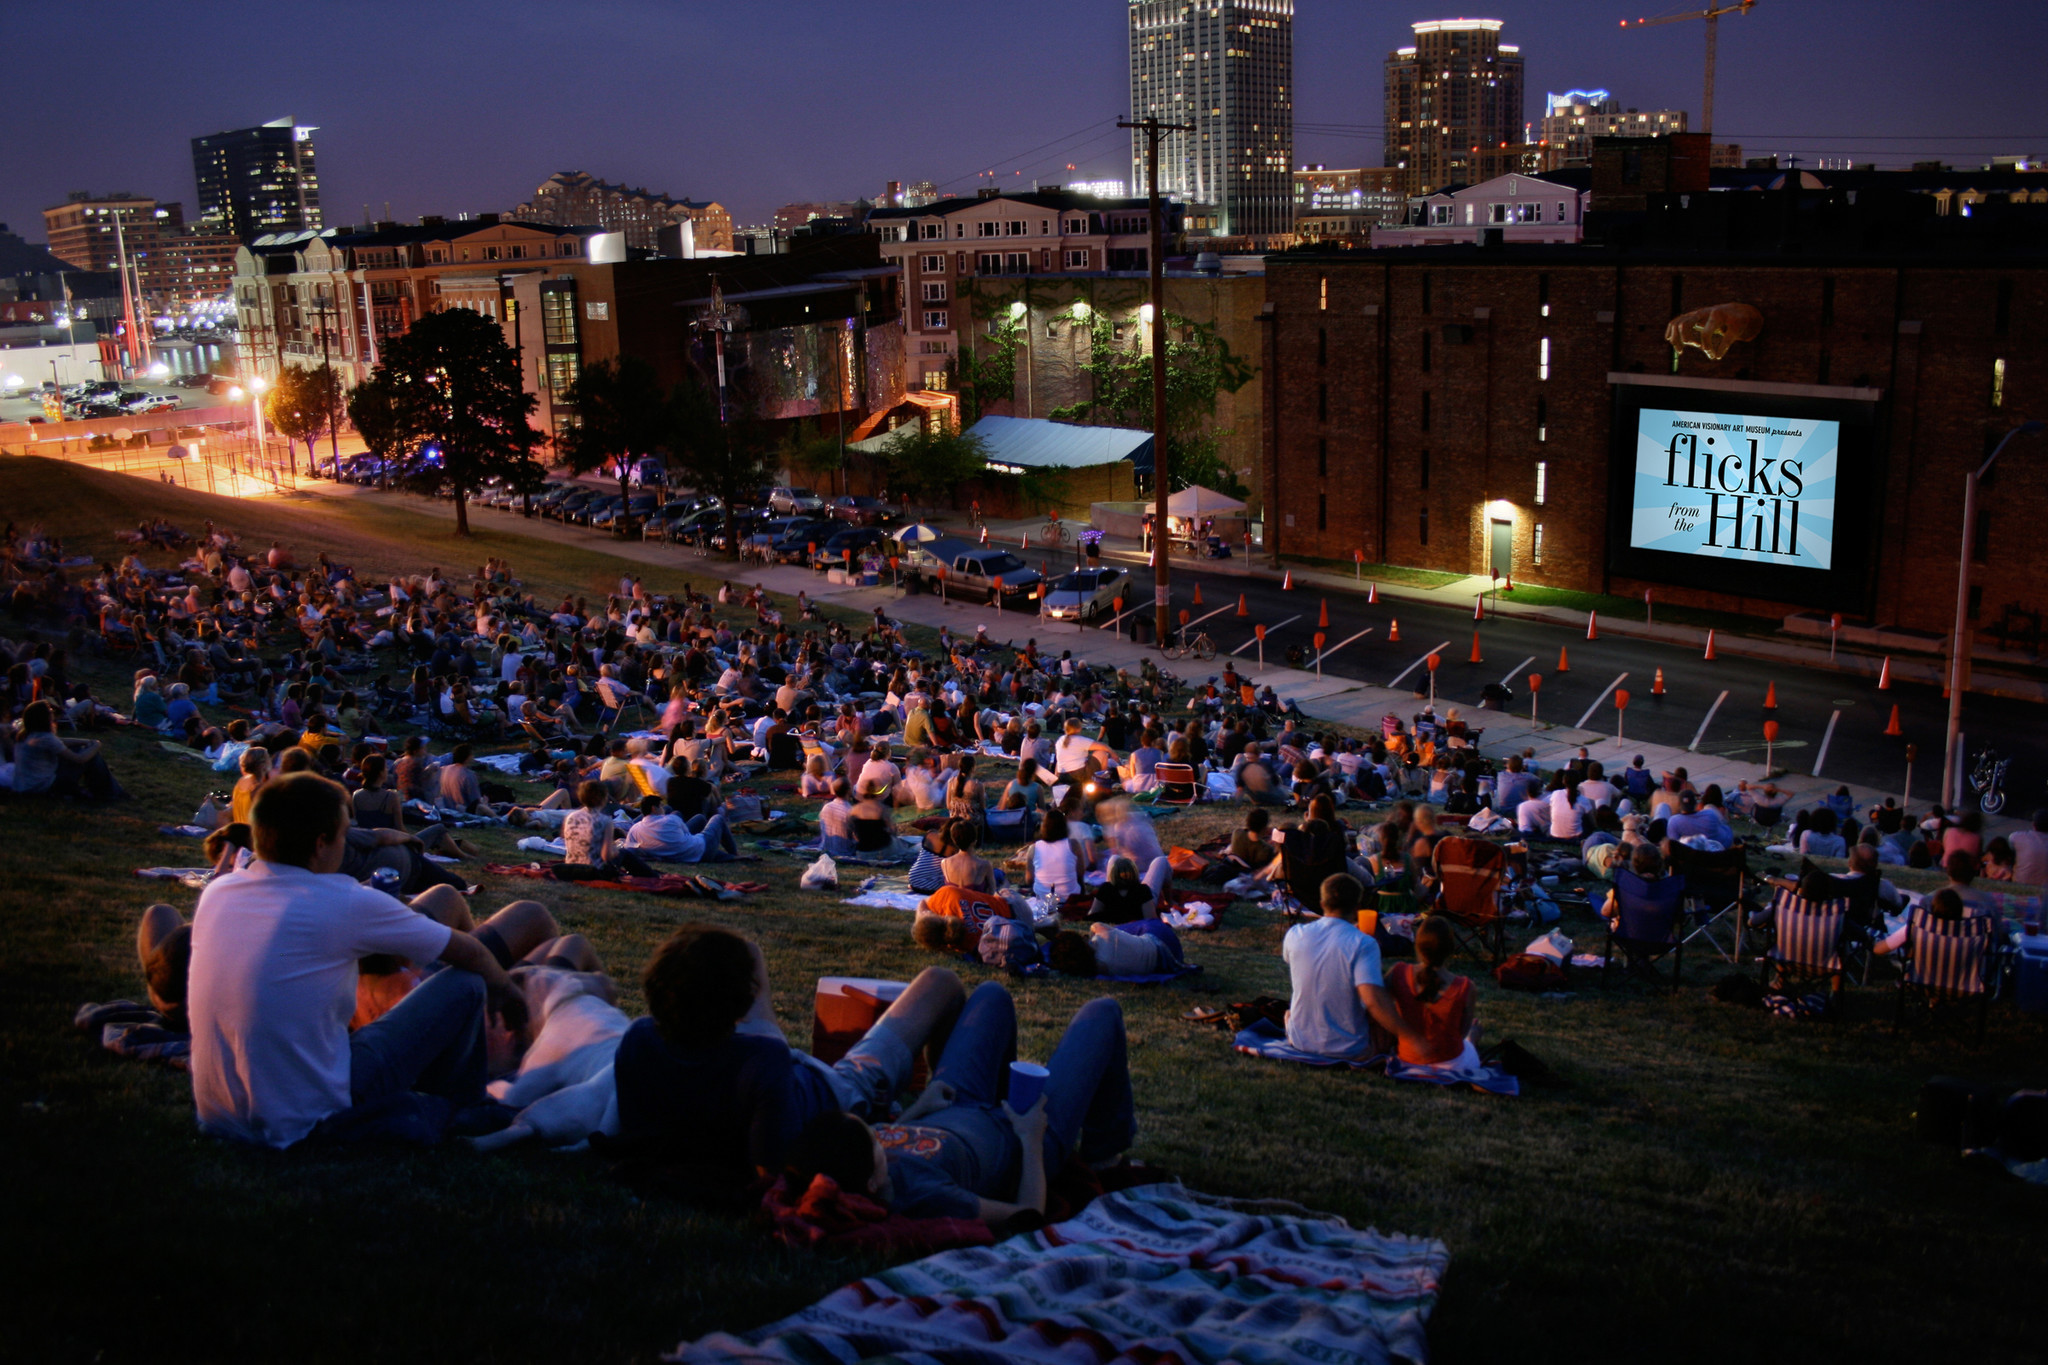 A complete guide to 2017 summer outdoor movie series in the Baltimore